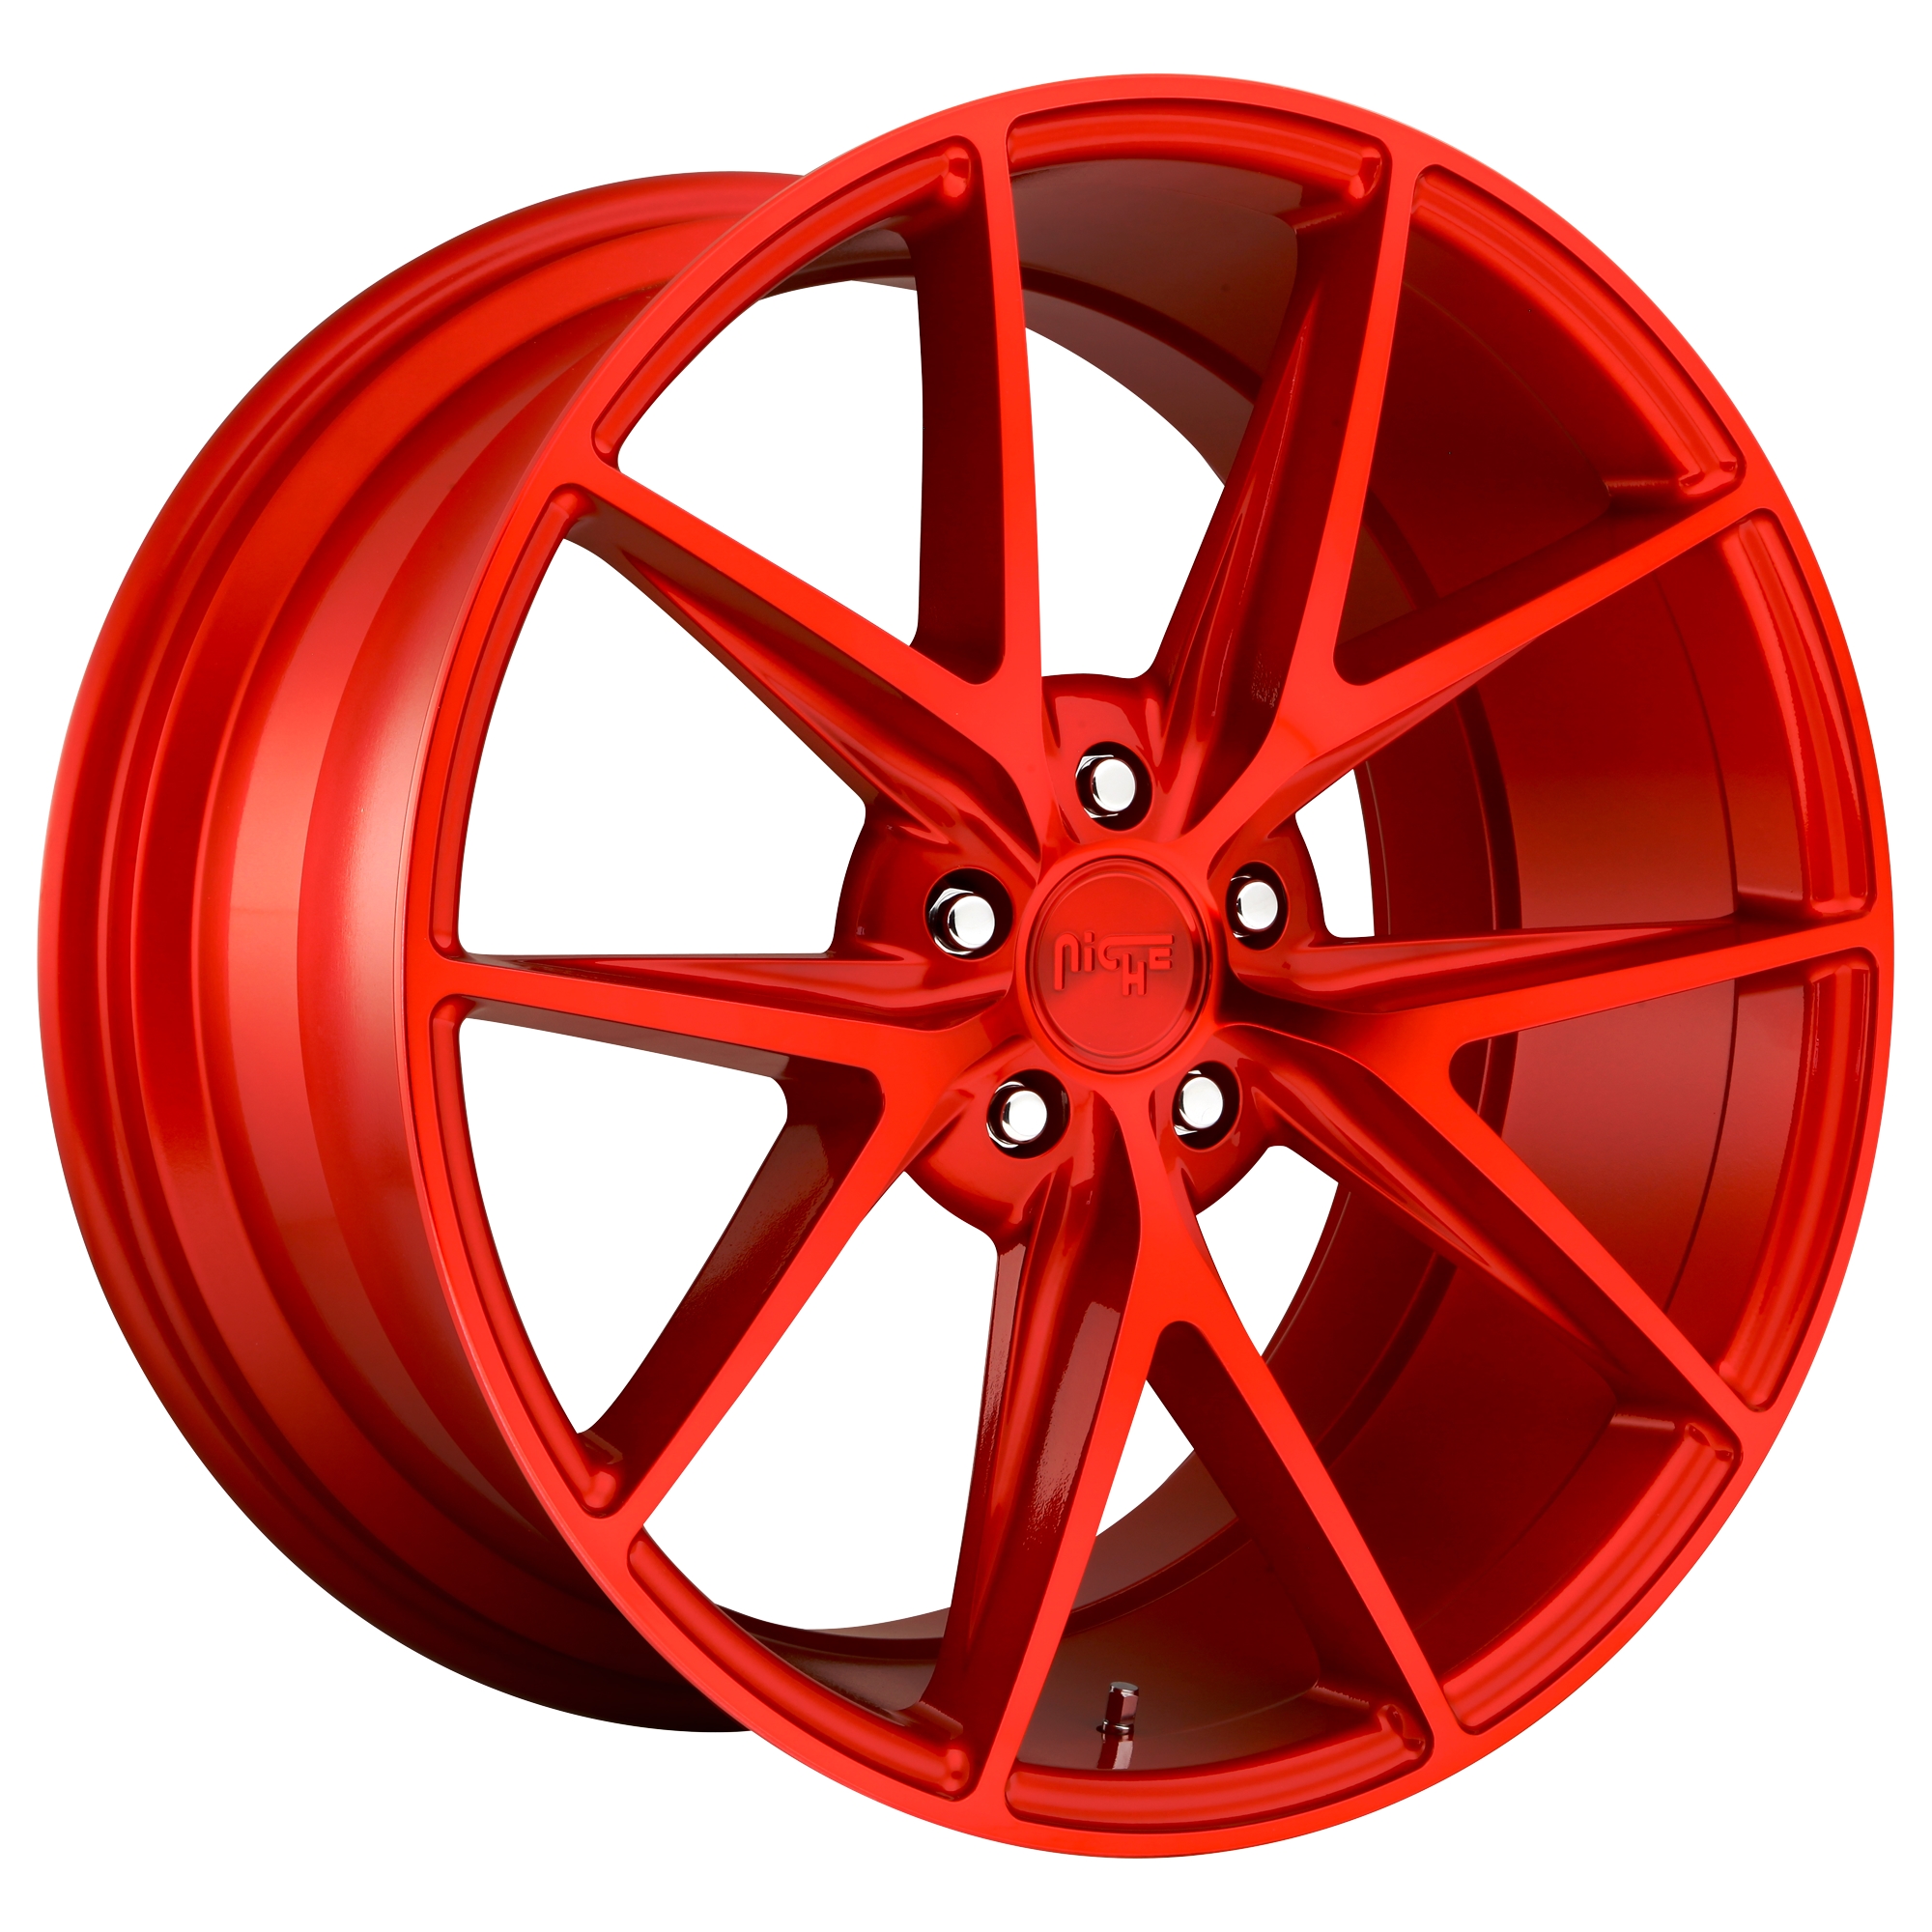 M186 MISANO   WHEELS AND RIMS PACKAGES